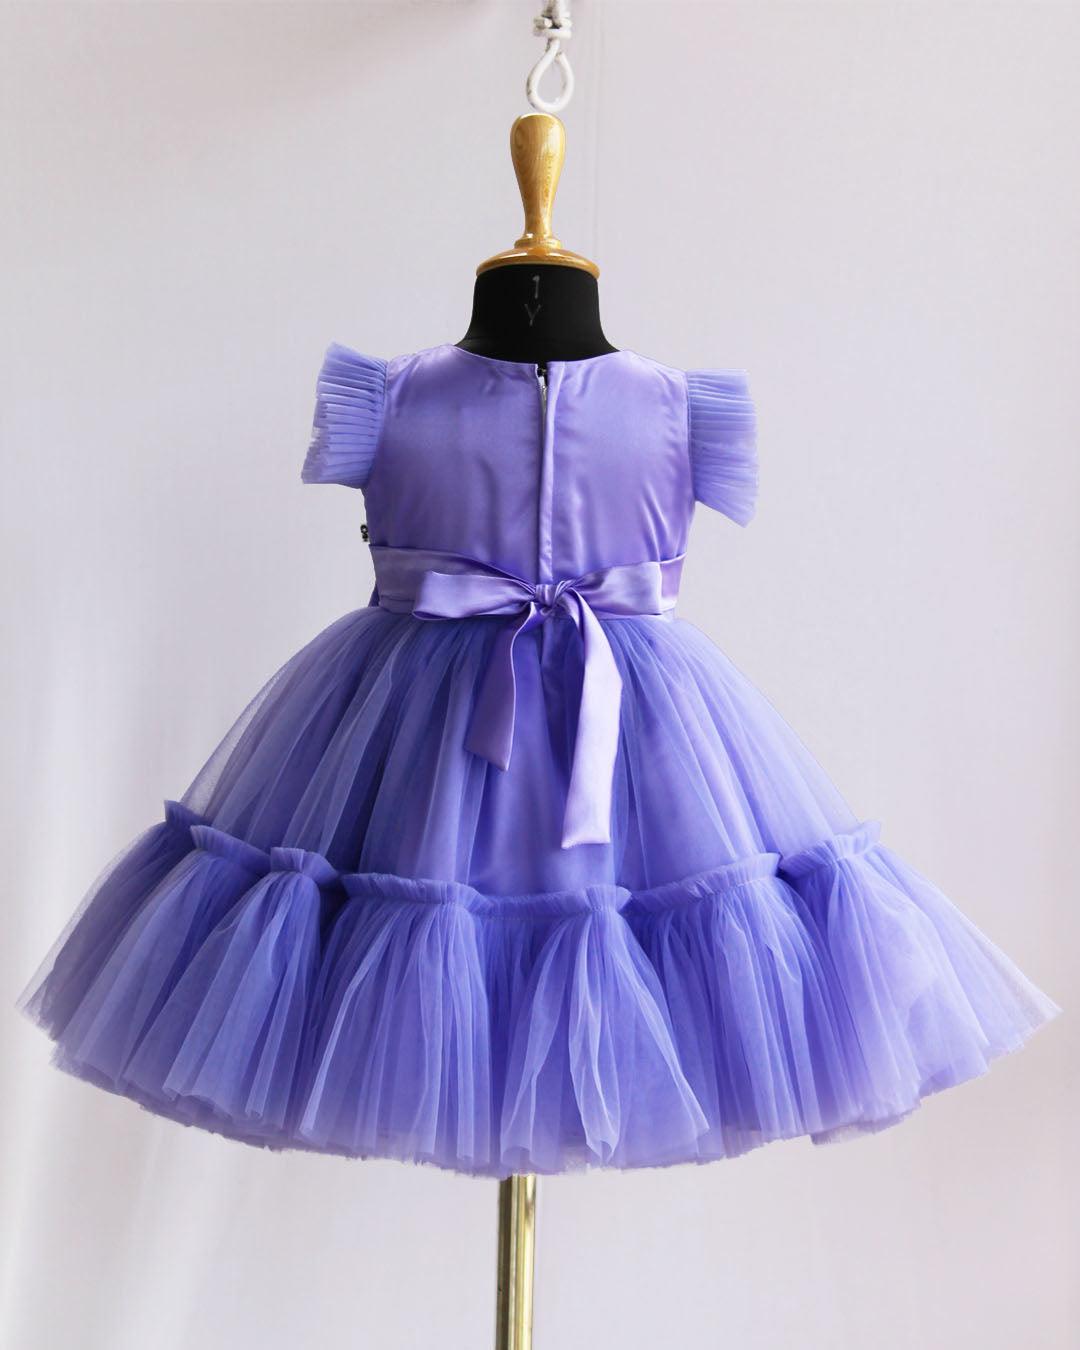 Lavender Shade Pleated Thread Embroidery Bow Frock
Material: : Lavender Shade Pleated Embroidery Bow Frock is made with soft mono nylon net fabrics with ruffled bottom. Heavy thread embroidered fabric is given in th